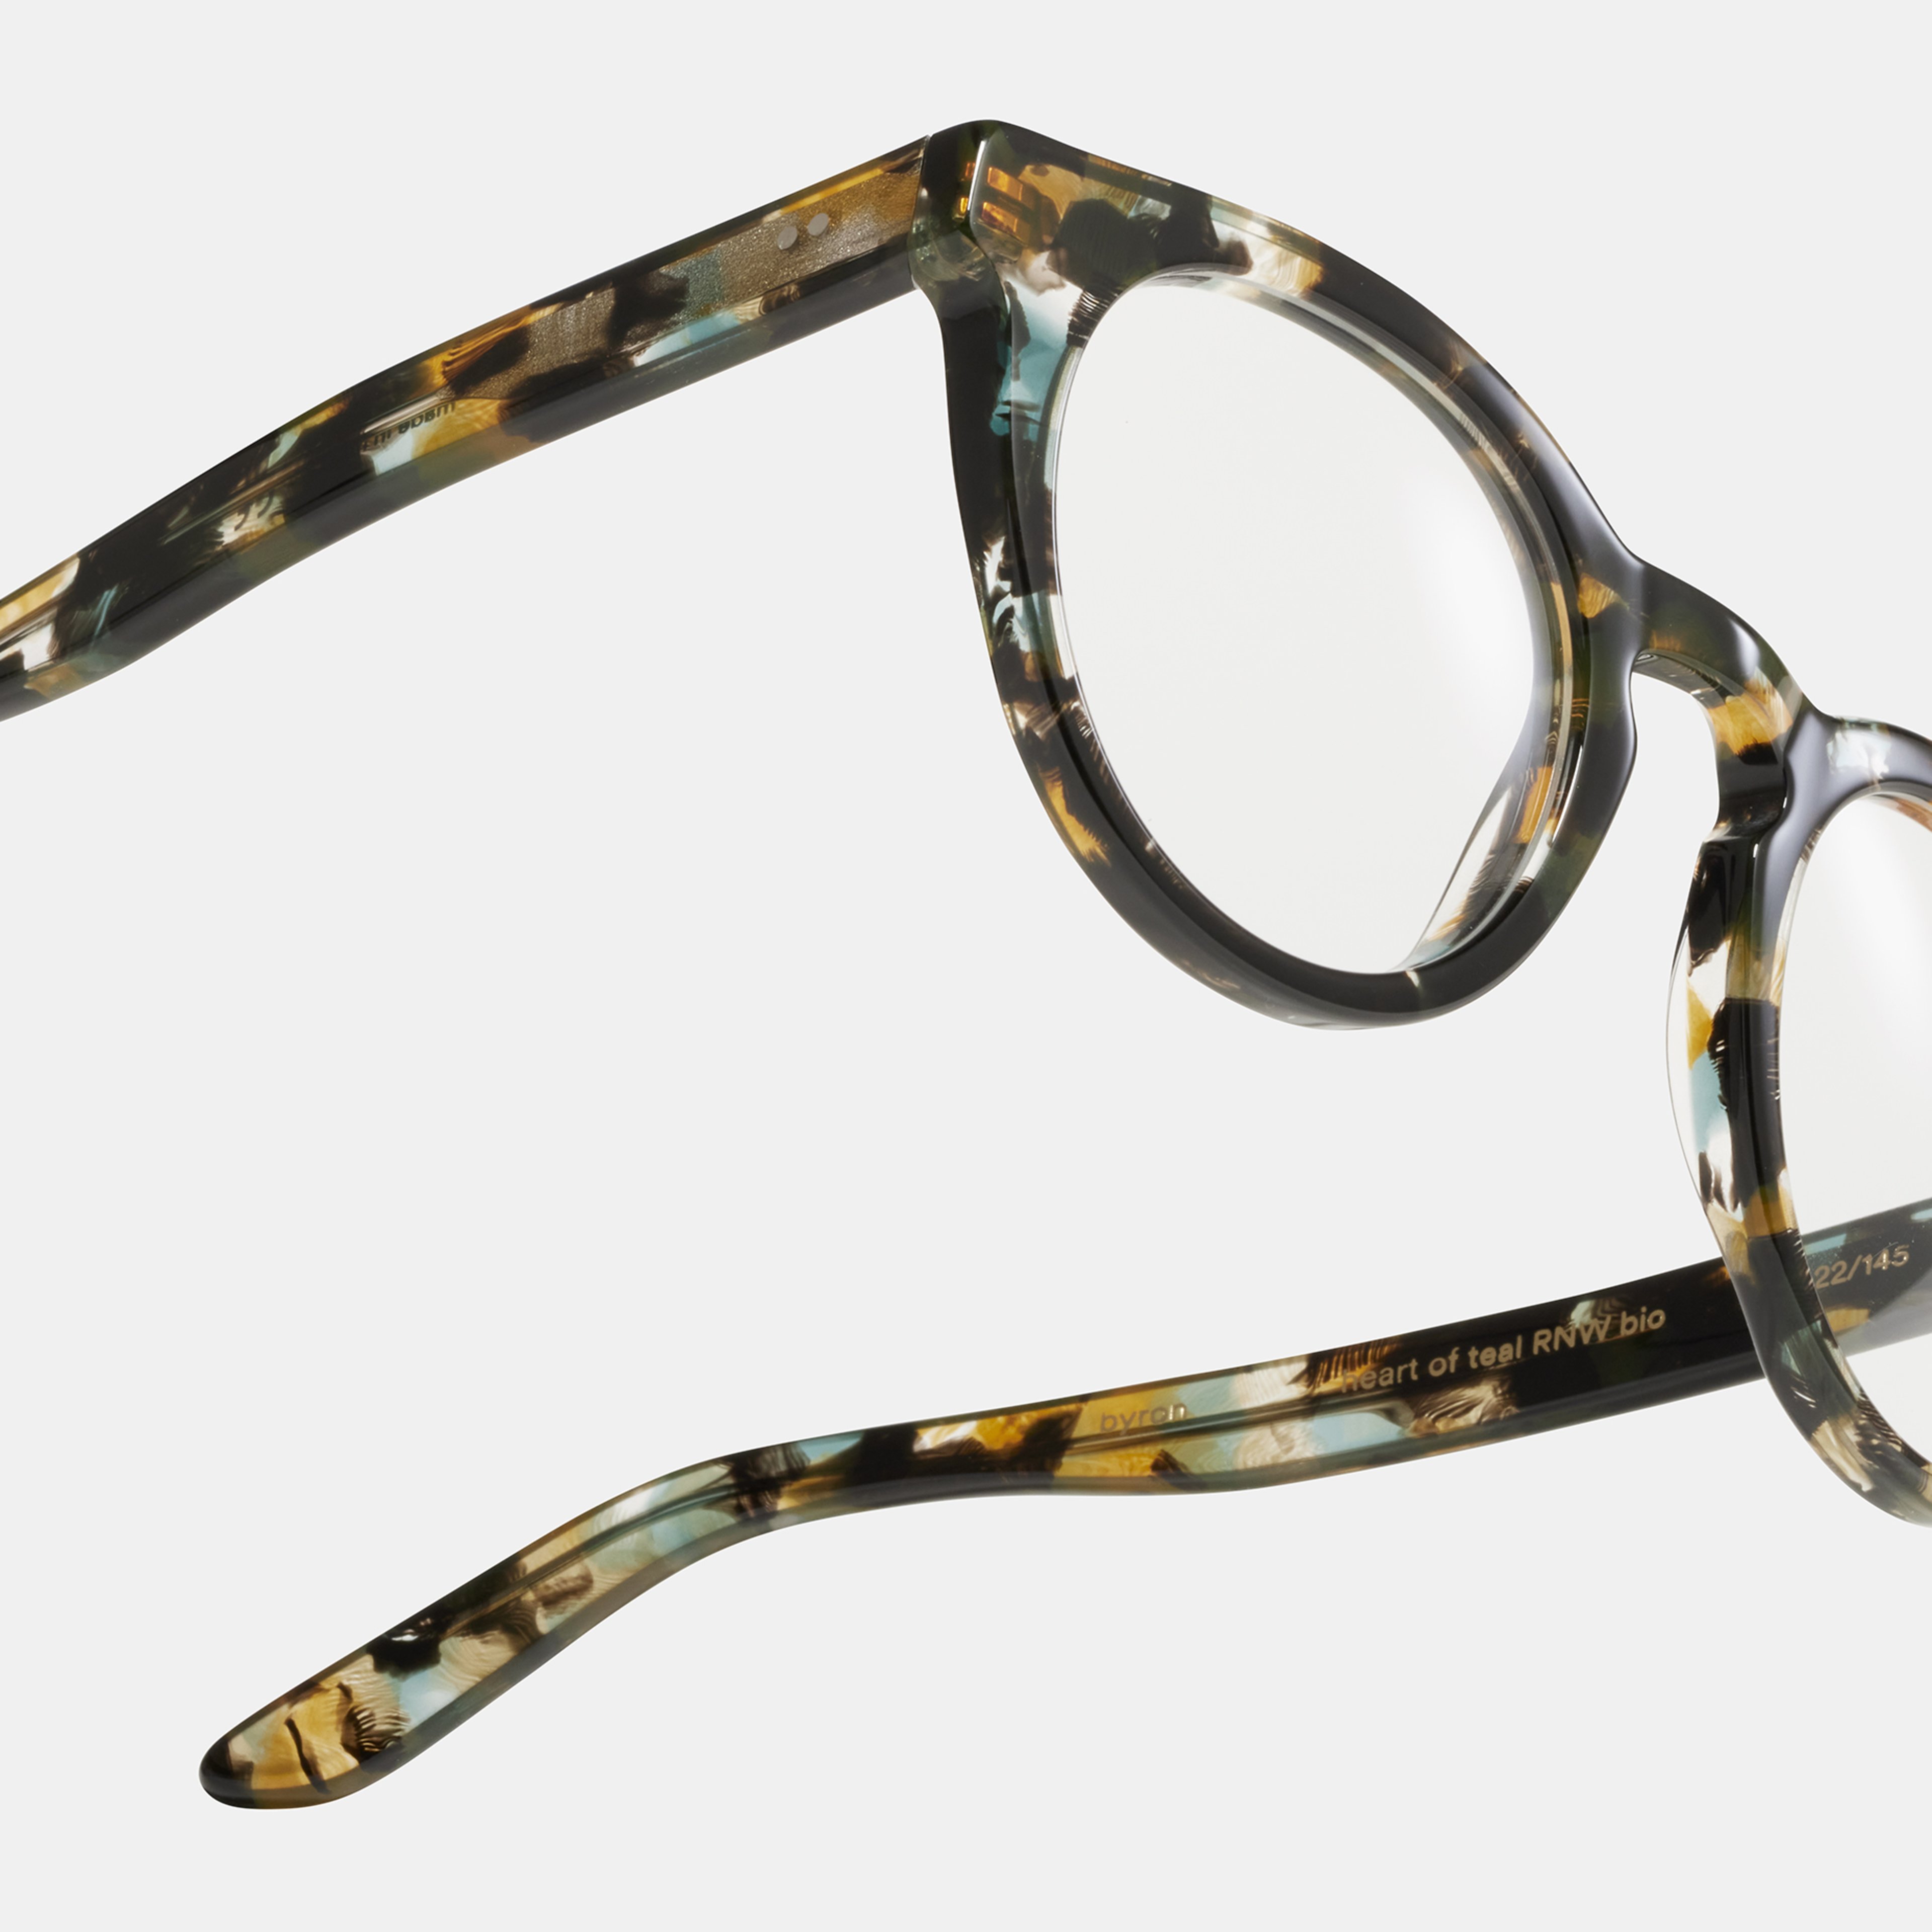 Ace & Tate Glasses | Round  in yellow,, blue,, Black